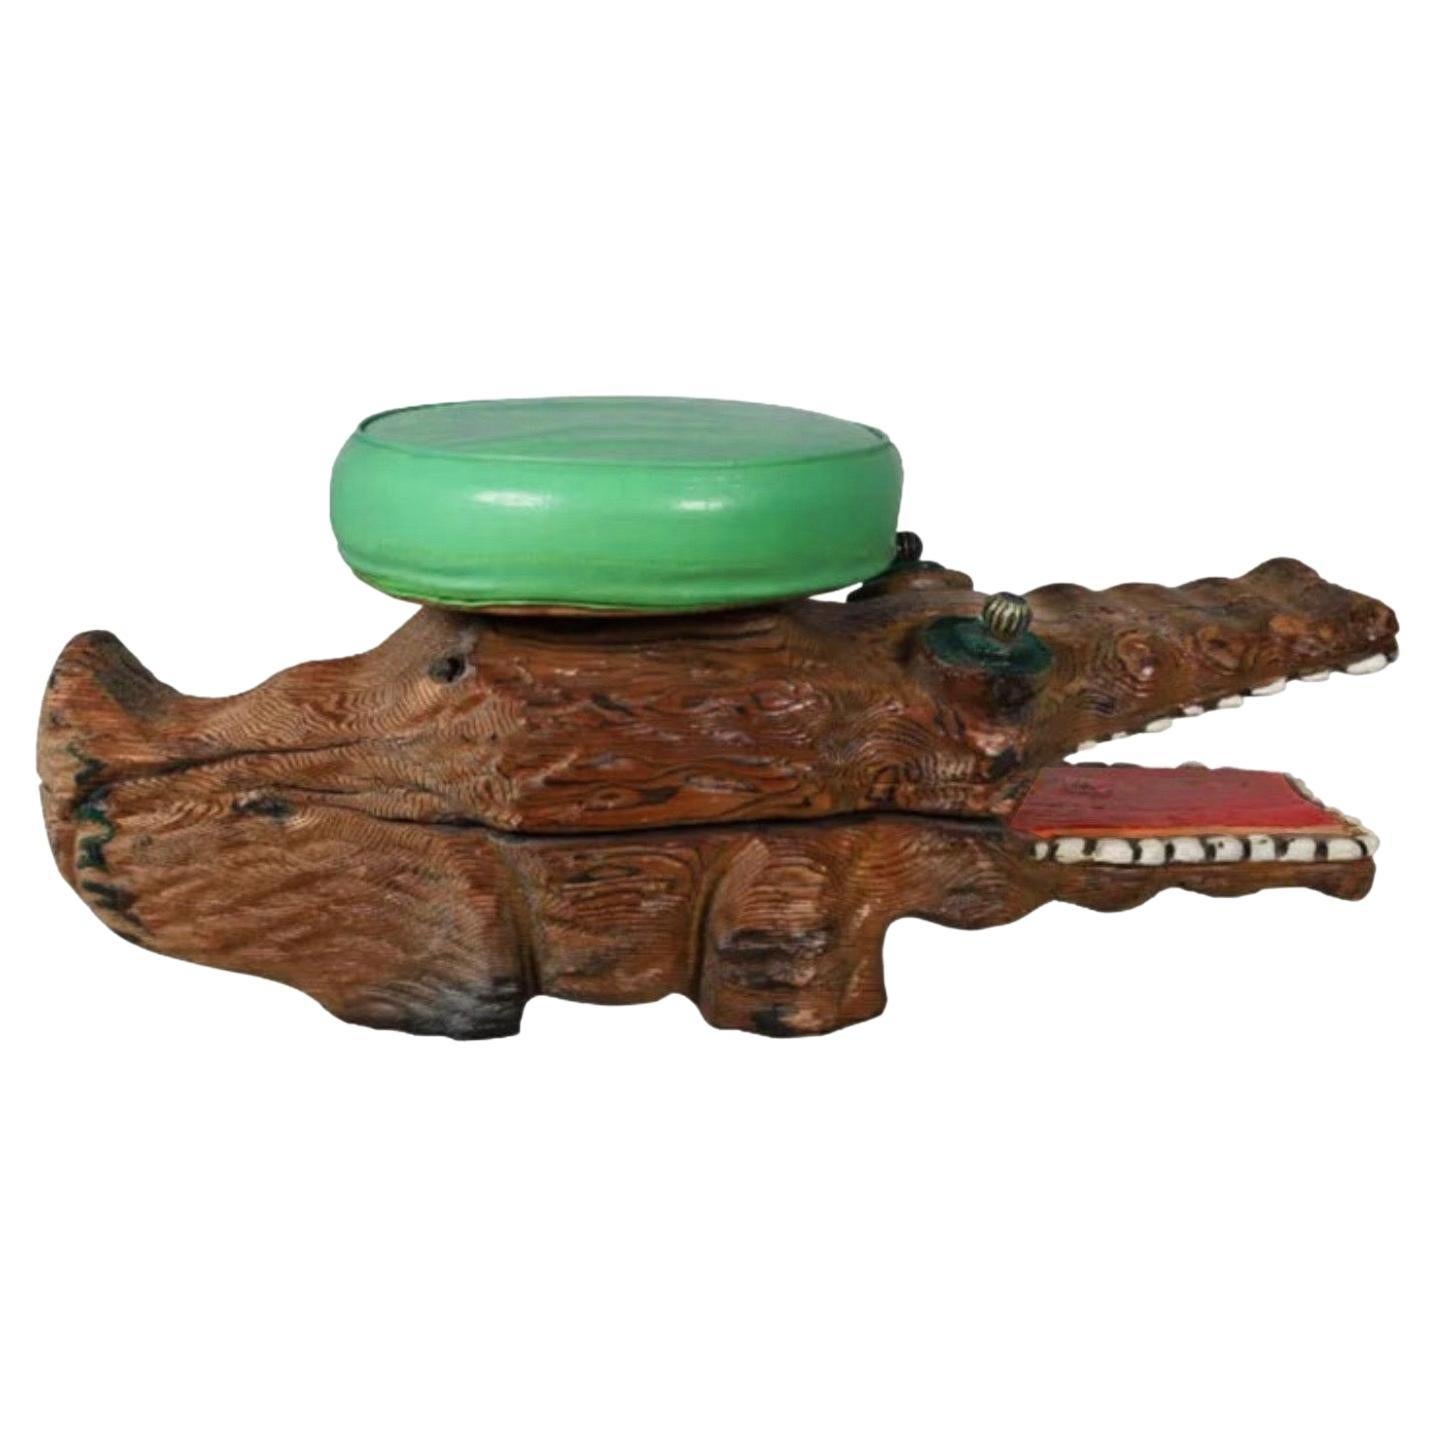 Witco Decor Tropical Tiki Glam Alligator Bench, Stool, Polychrome Sculpture c. 1958- early 1960’s. Gorgeous piece, all original, polychromed, Hand-carved and hand-painted 

In 1958, a small importing company named Western International Trading Co.